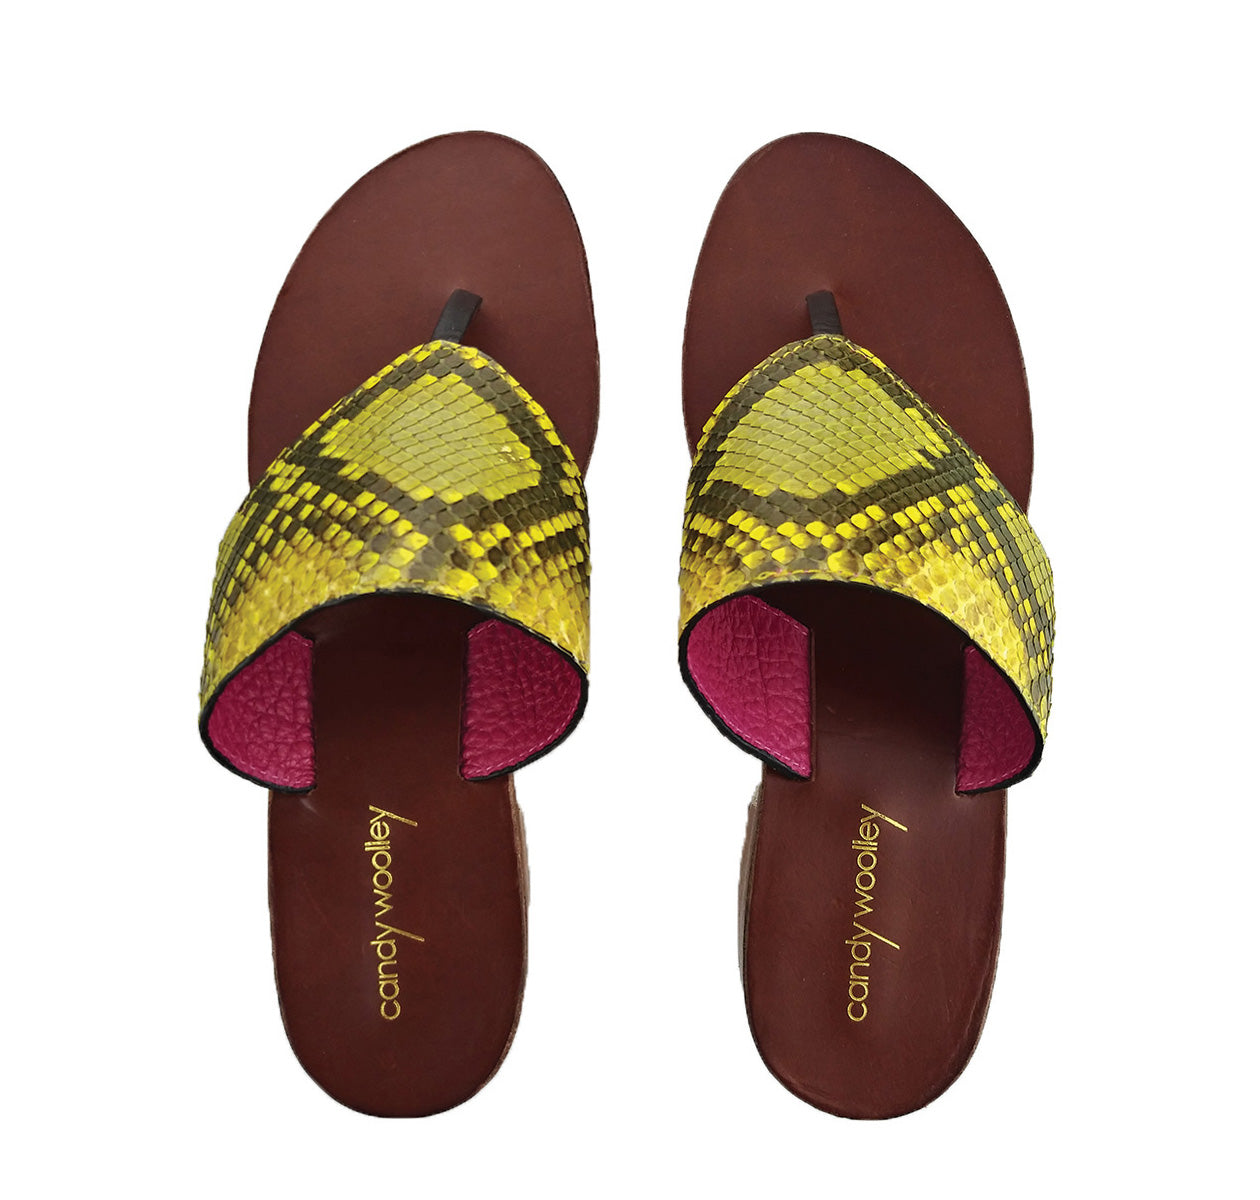 Genuine Python Yellow & Taupe Flat Thong Sandals. Size Available 9. [NEW: NON-SLIP & SOLE PROTECTOR]